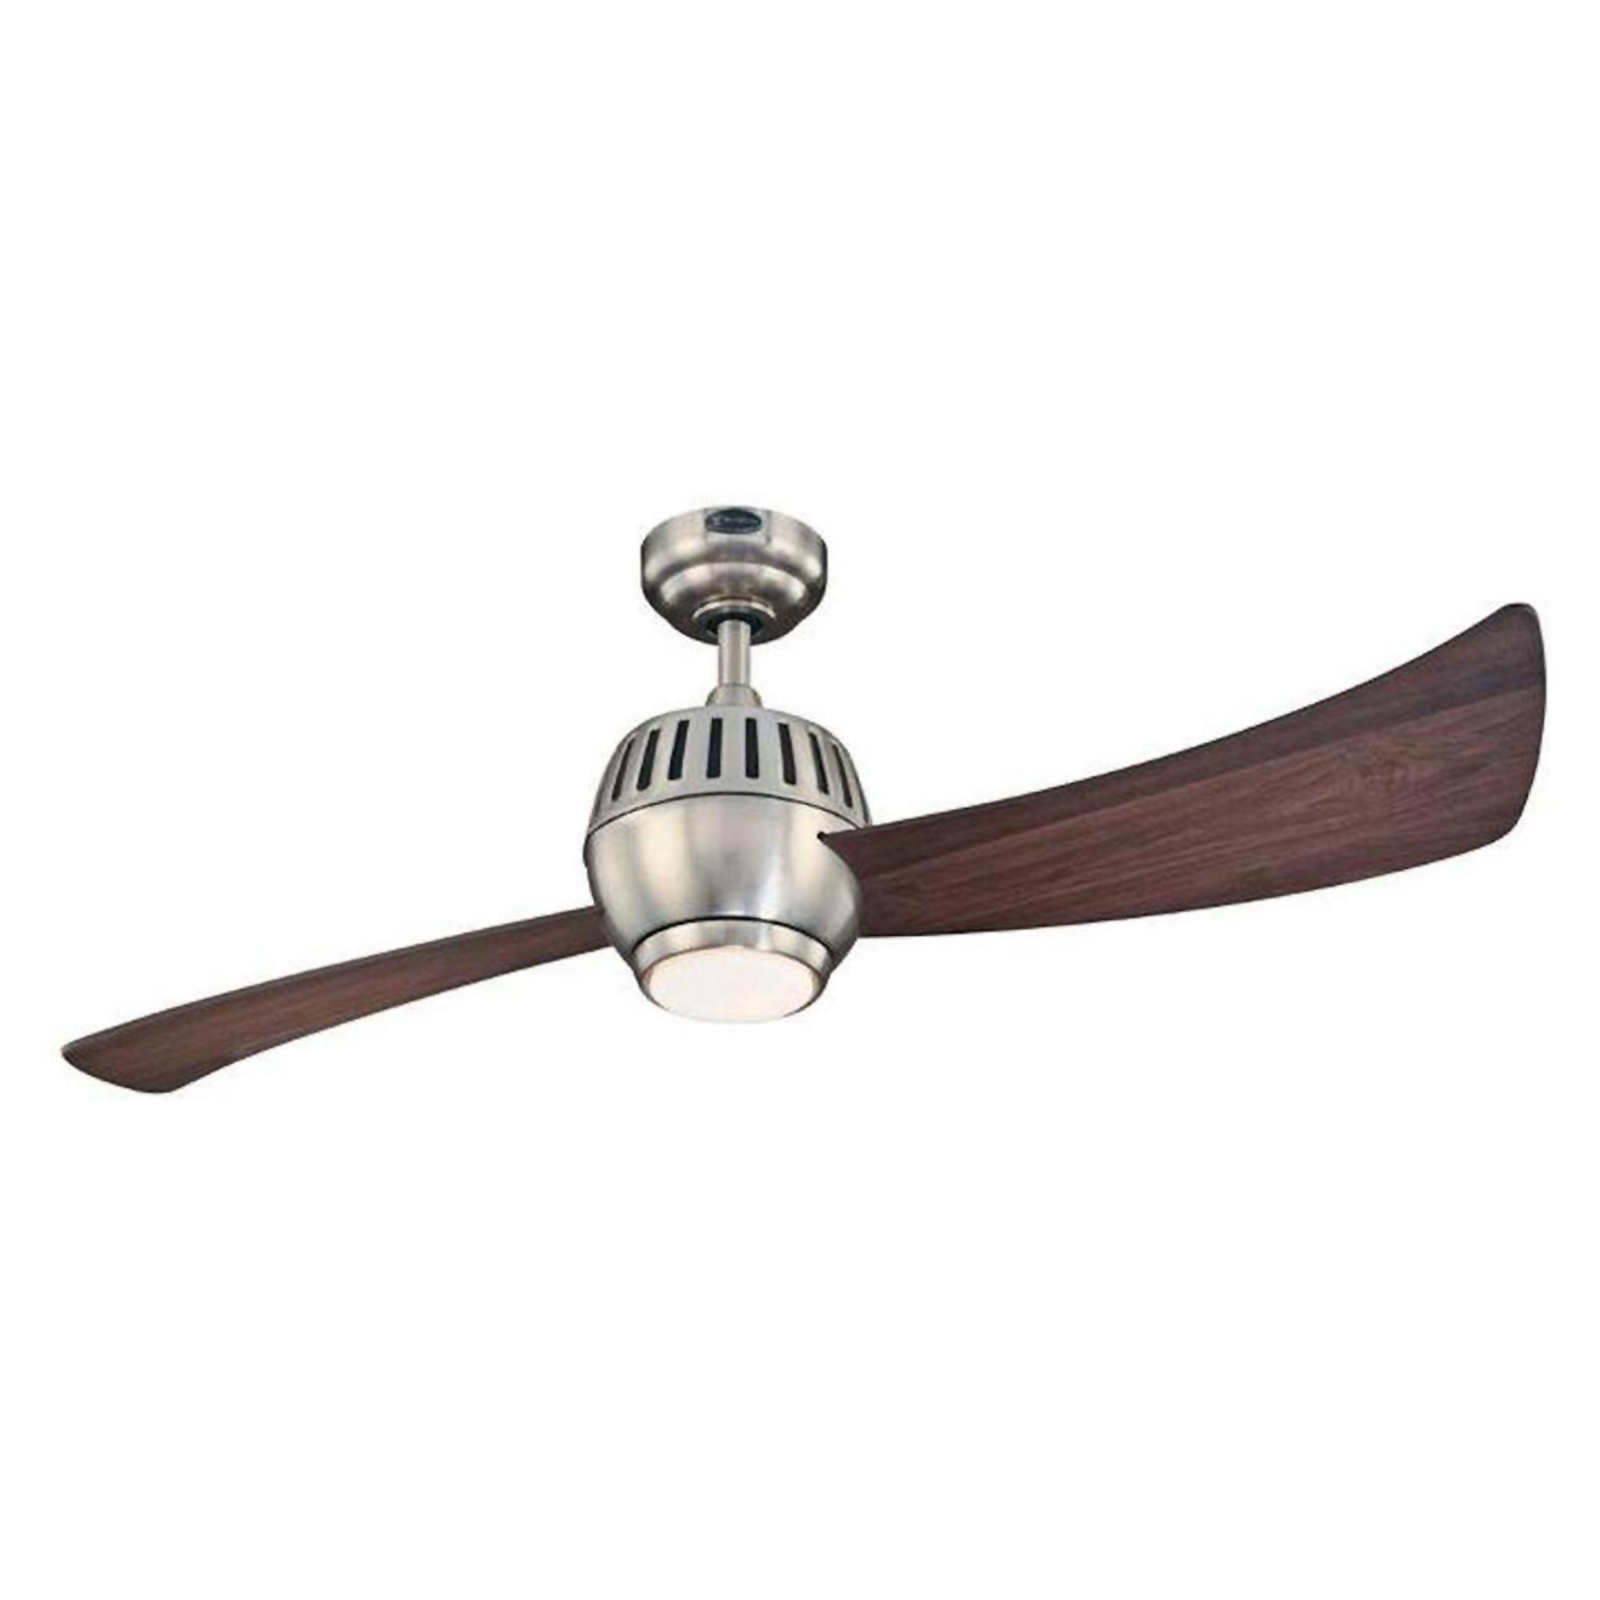 Westinghouse 7852400 Sparta 52" 2-Blade Indoor Ceiling Fan w/Light & Remote Control - Brushed Nickel